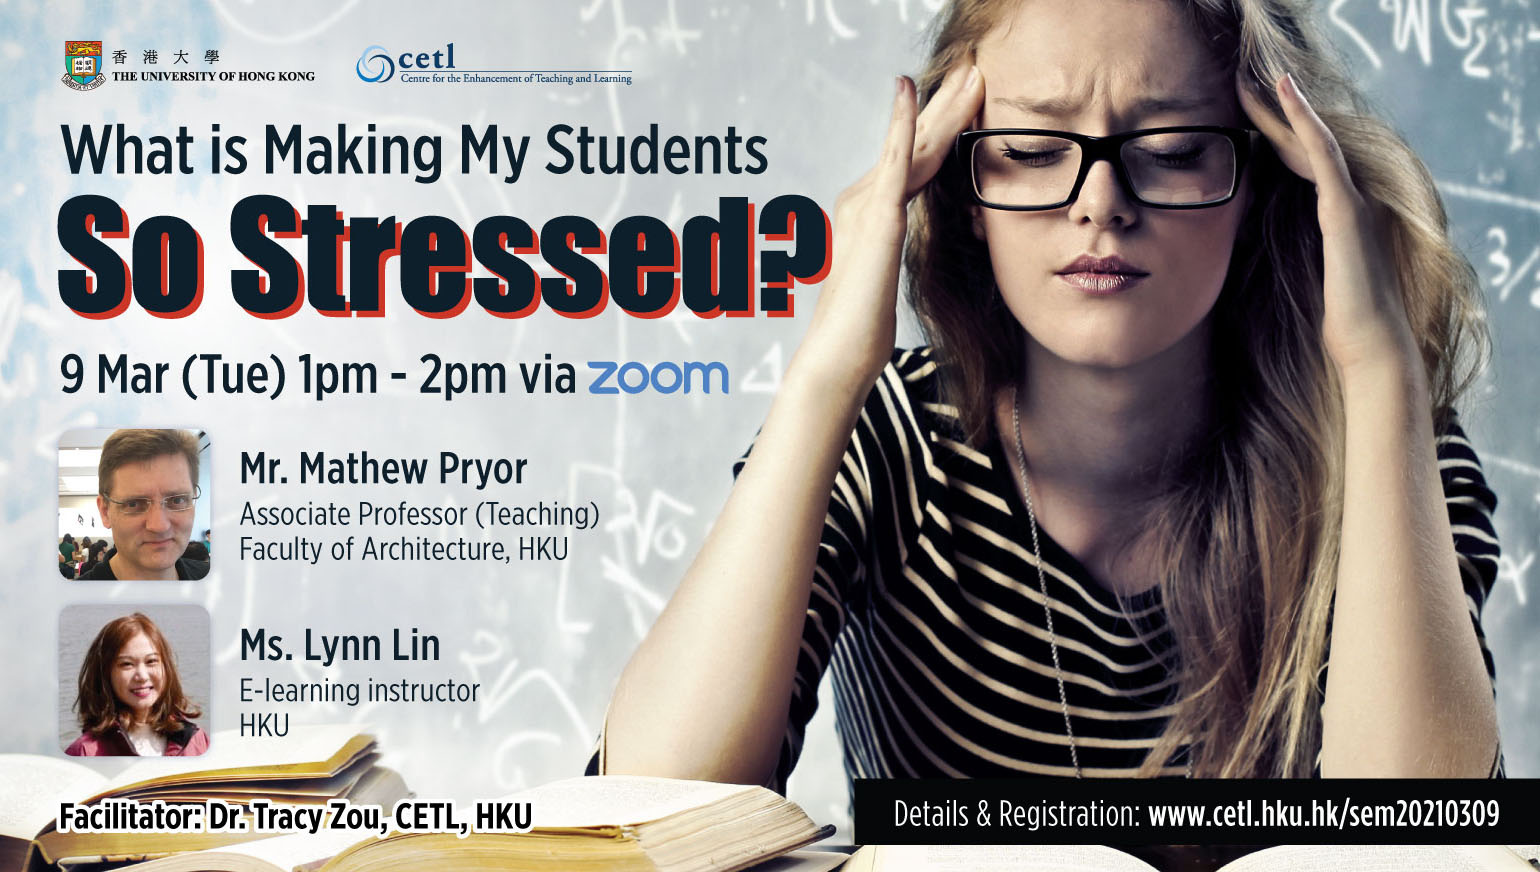 What is making my students so stressed?